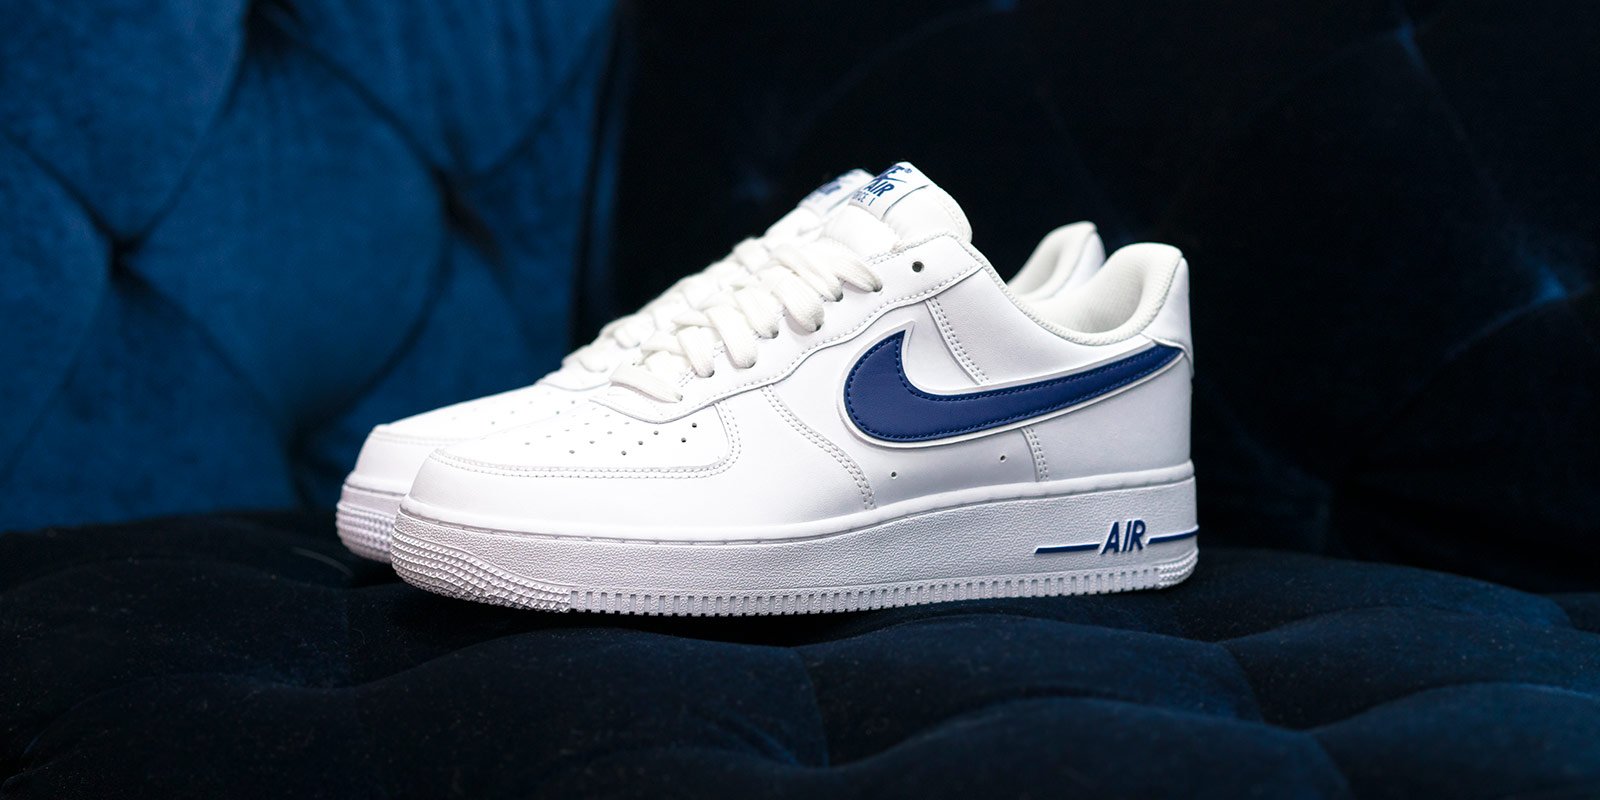 oud Auto eeuwig Sizing Guide: How Does The Nike Air Force 1 Fit? | The Retro Insider